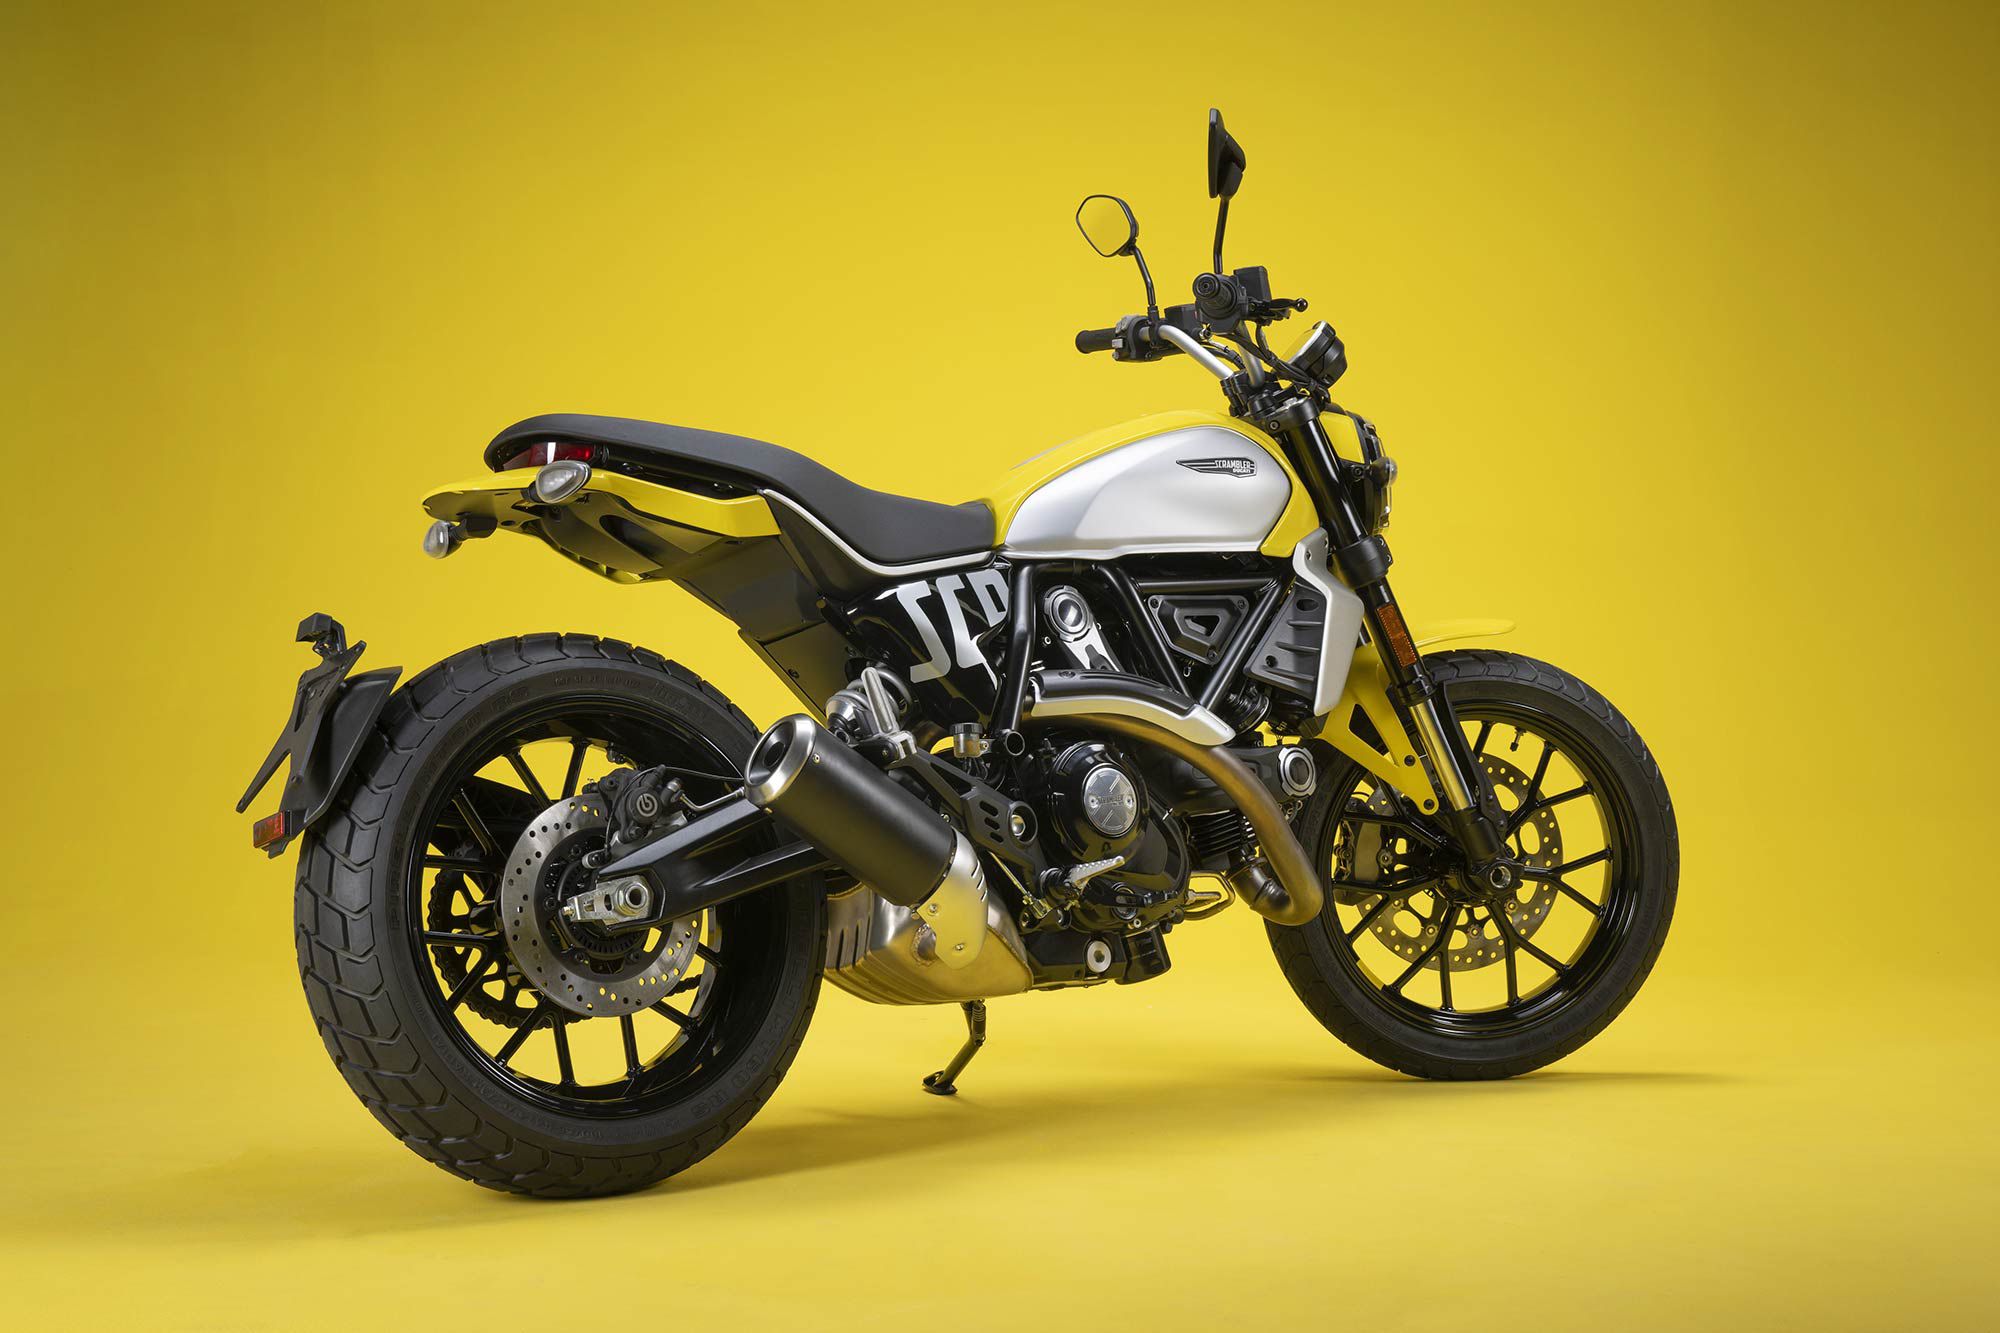 The Scrambler Icon will start at $10,995.